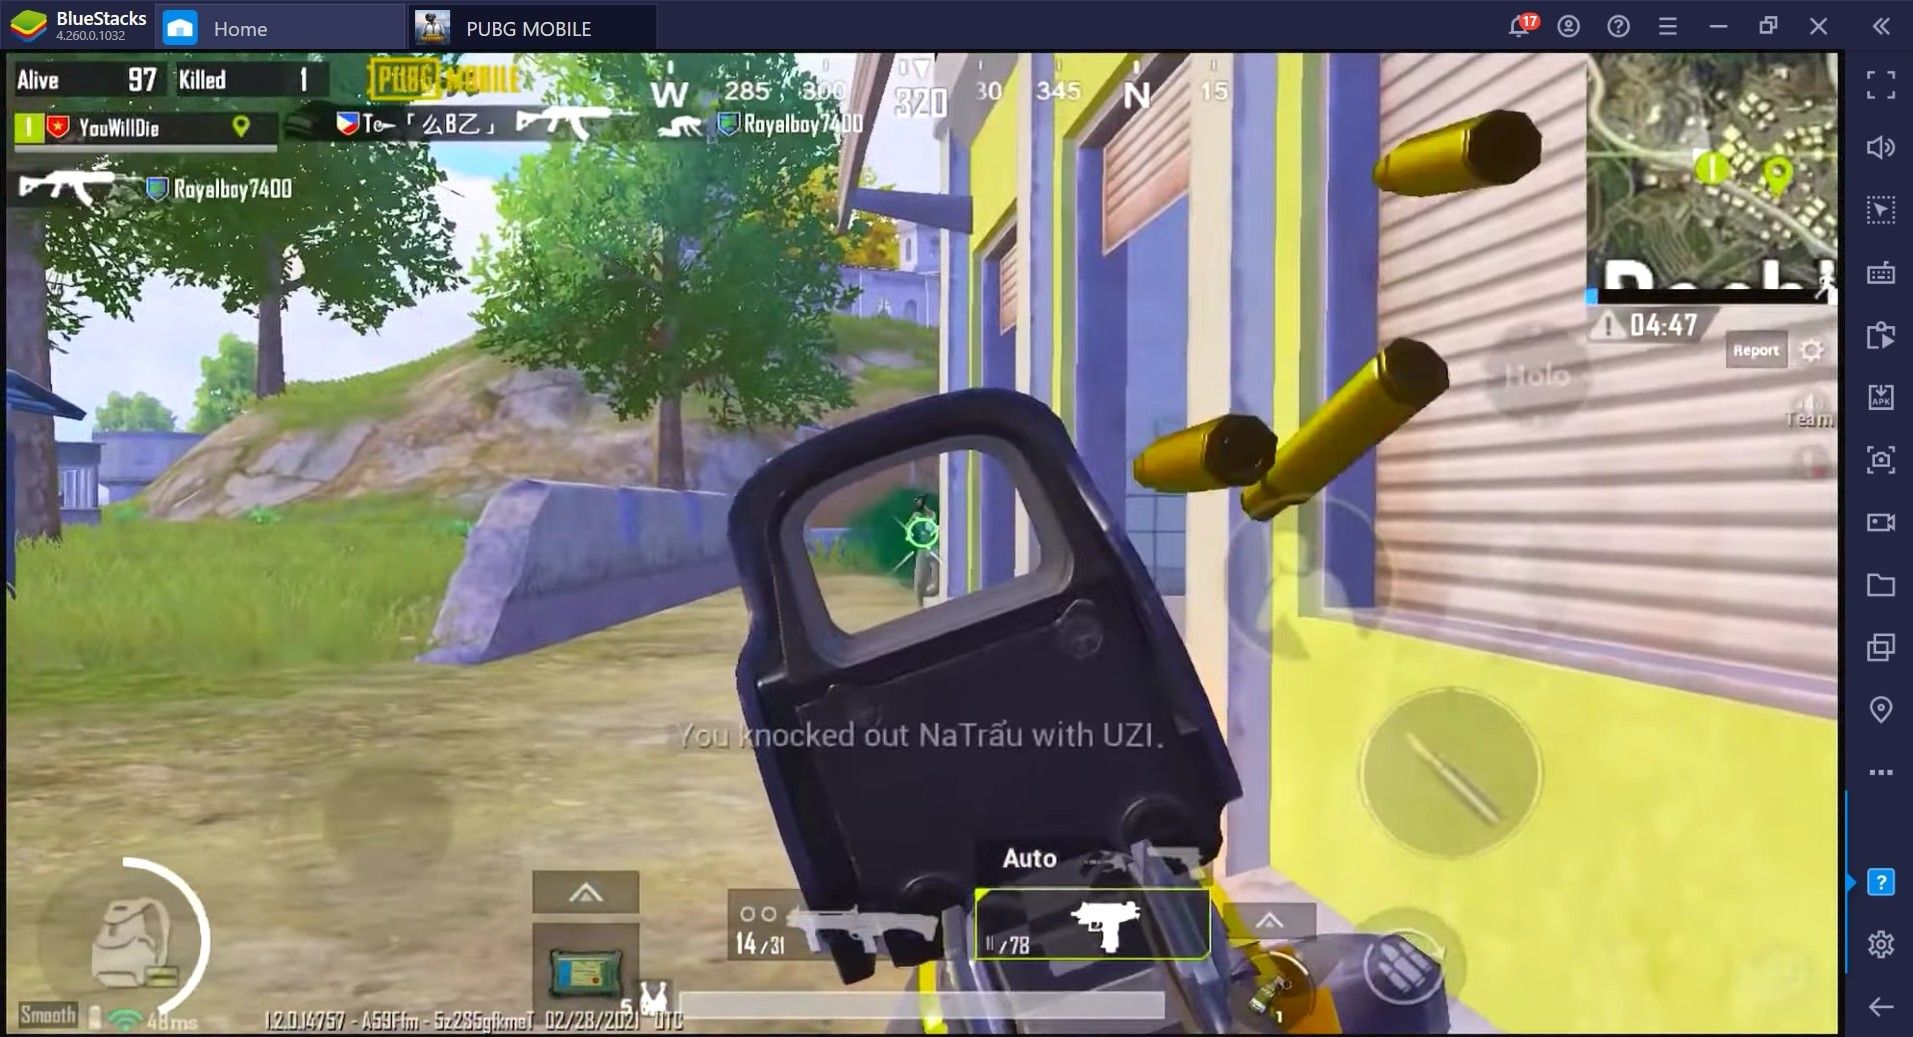 PUBG Mobile FAMAS Weapon Guide: Its Recoil Needs to Be Managed